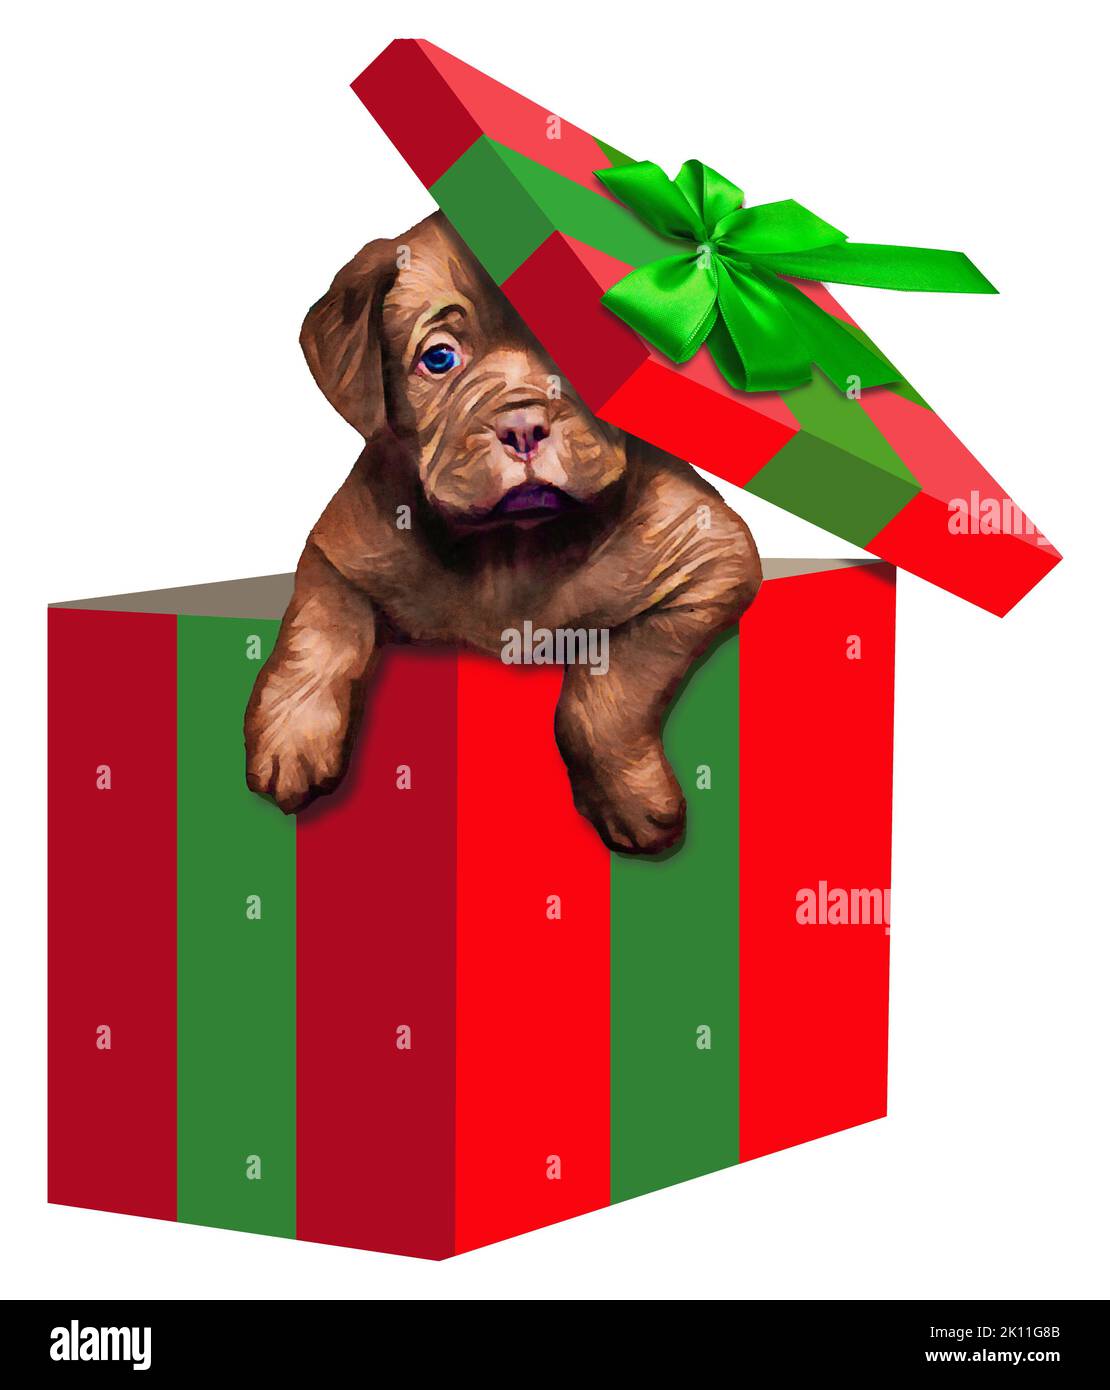 A cute puppy dog pops out of a Christmas gift box in a 3-d illustration Stock Photo